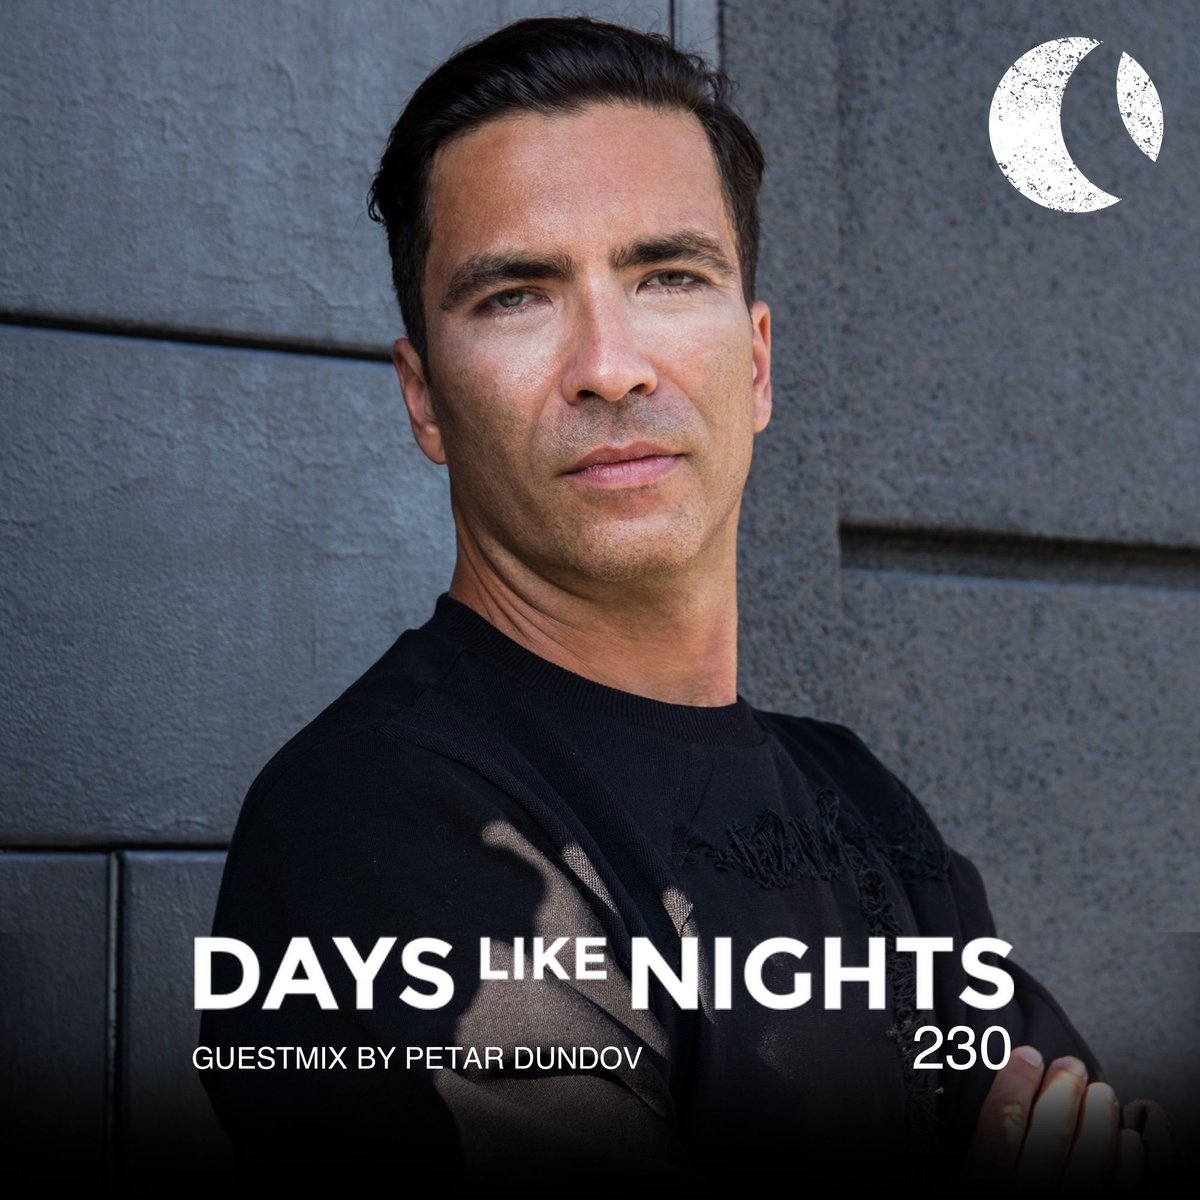 #nowplaying on #webradio https://t.co/8g3SbusSqo @eelkekleijn #DaysLikeNights today with a stunning guest Mix by @petardundov - #streaming here https://t.co/7TG5Nmzmty https://t.co/a45gIKXZiq